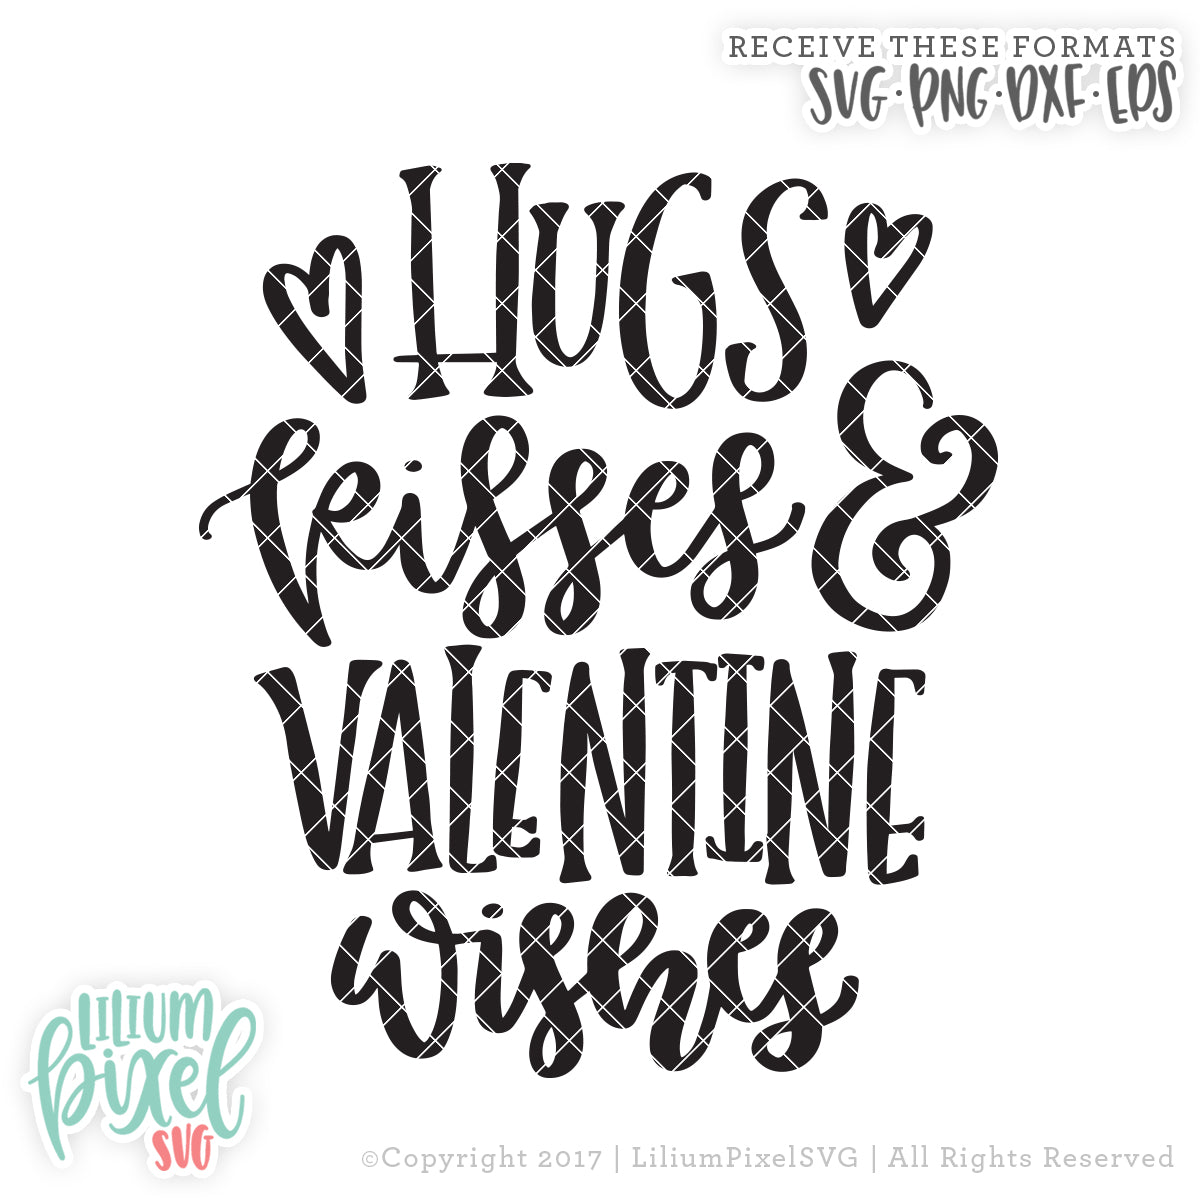 Hugs Kisses and Valentine Wishes 2017- SVG PNG DXF EPS Cut File • Silhouette • Cricut • More